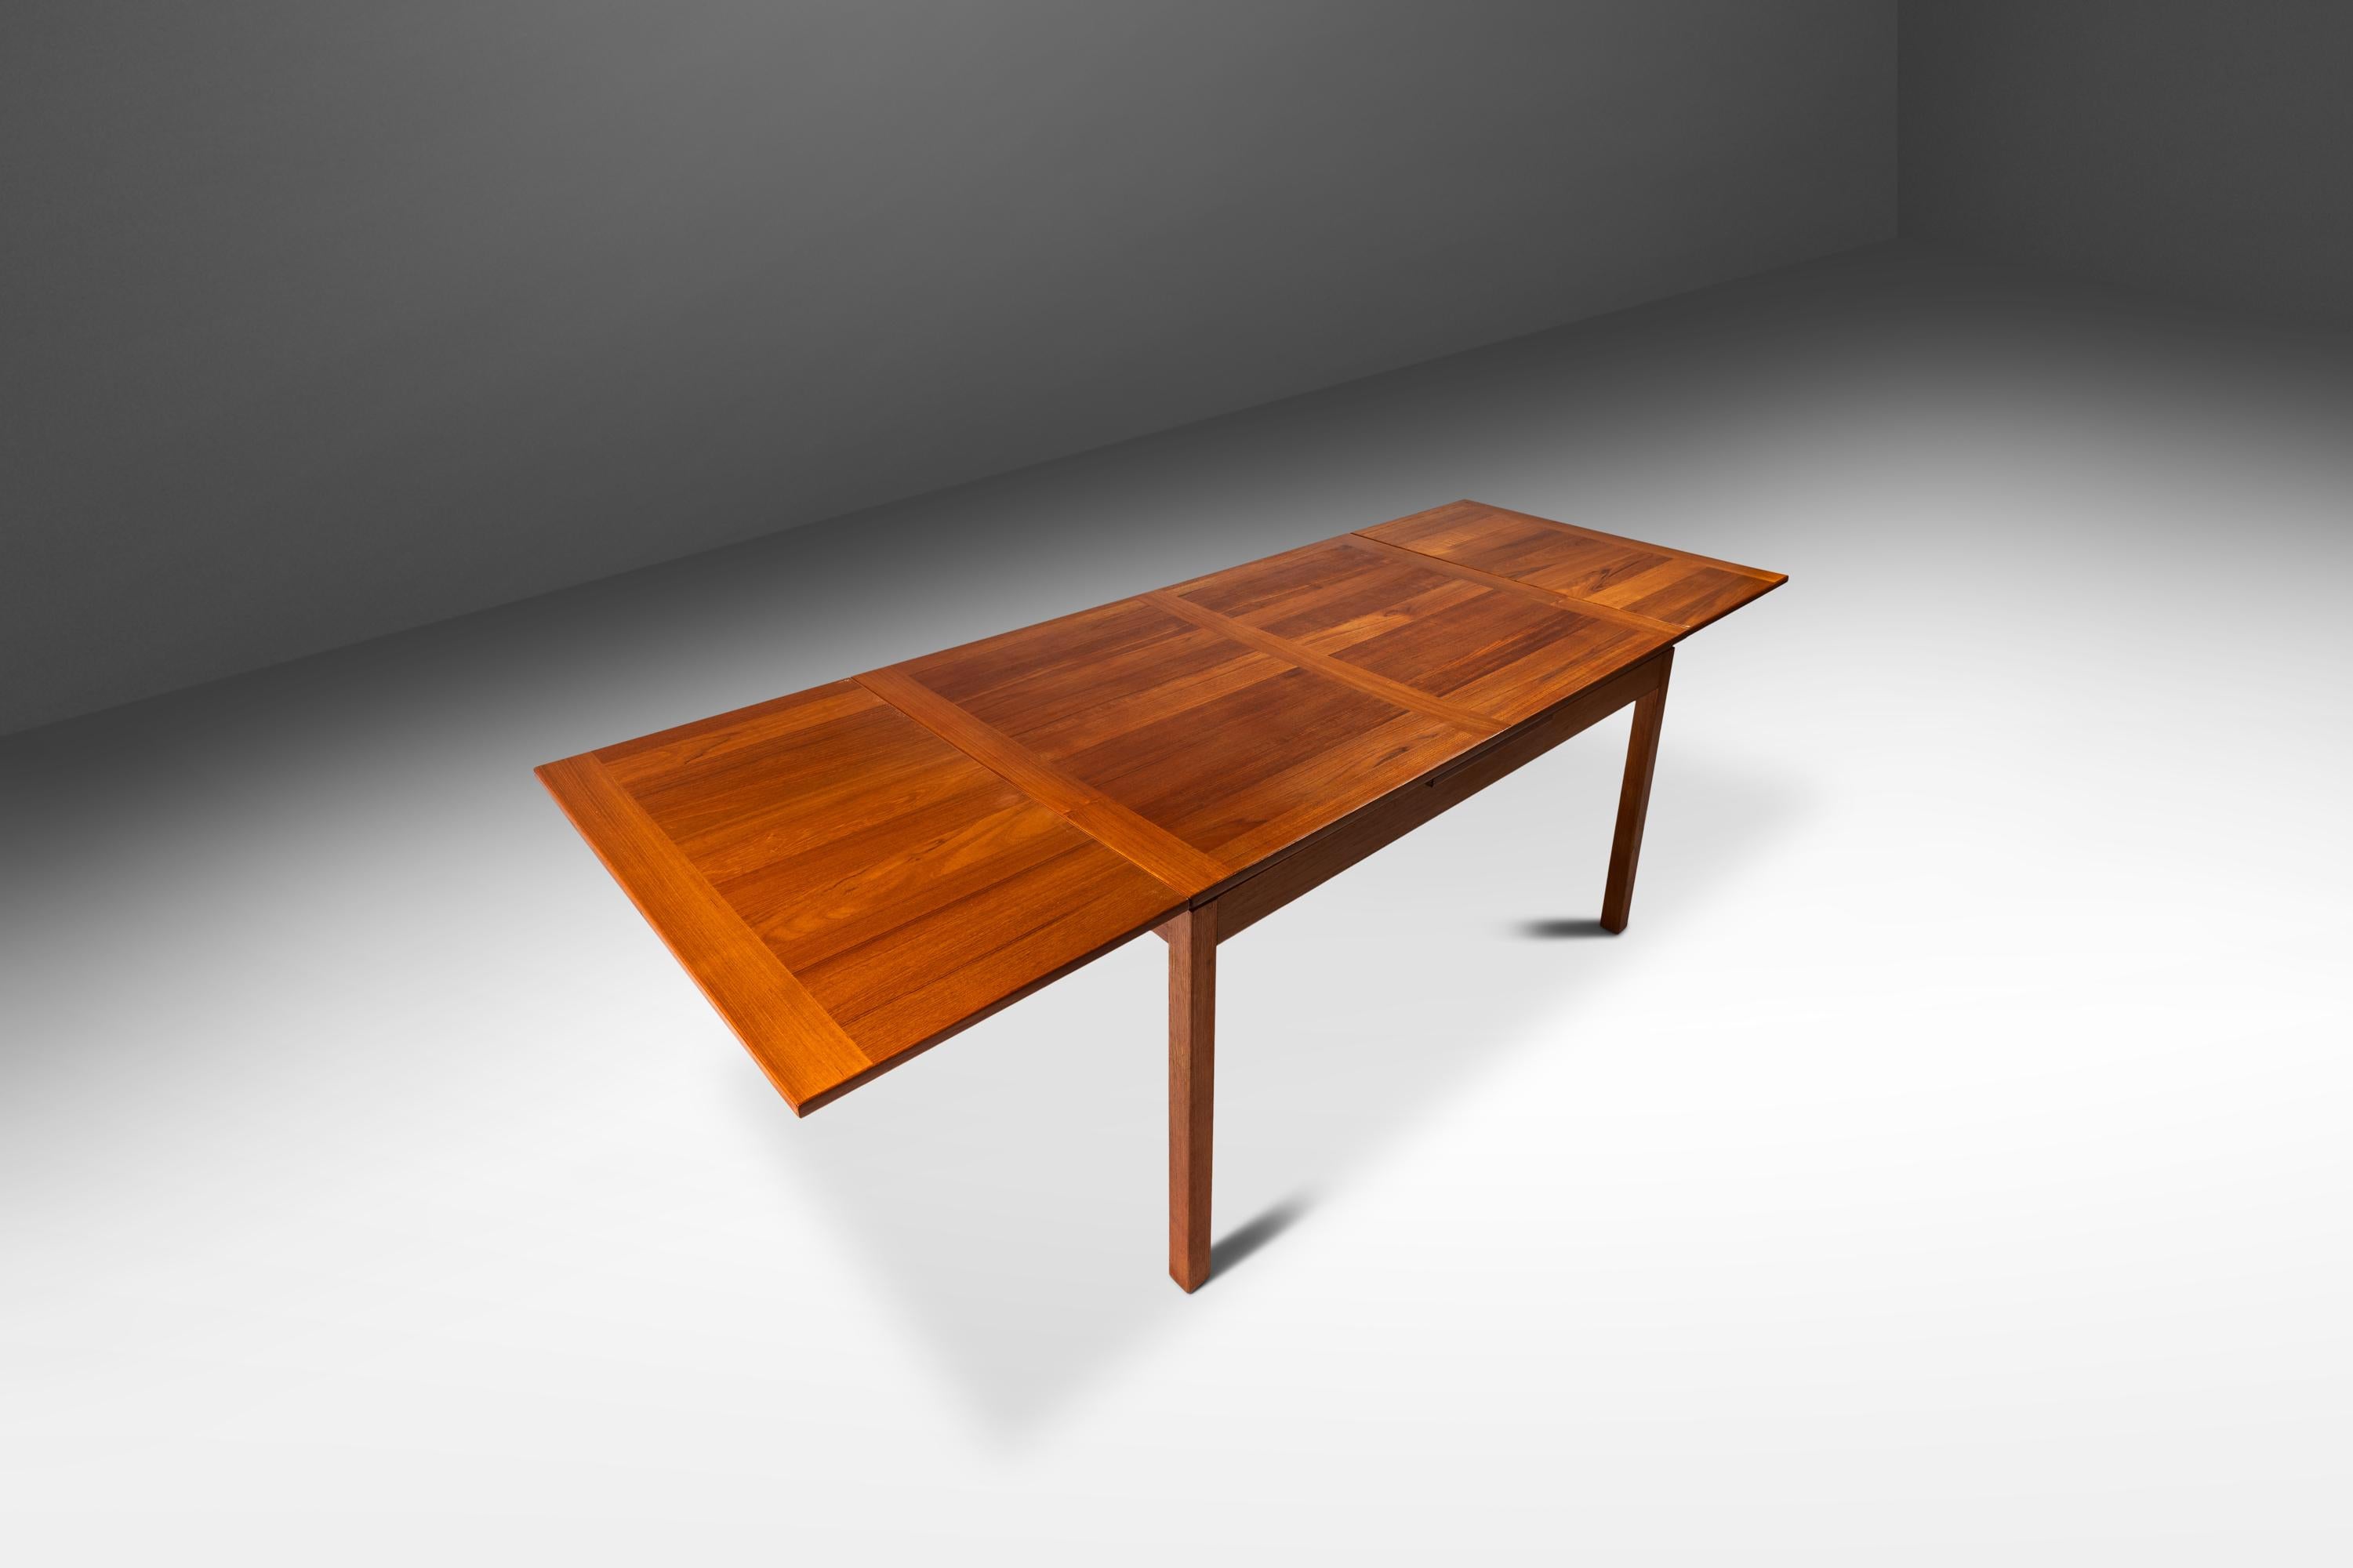 Late 20th Century Danish Teak Extension Dining Table with Stow-in-Table Leaves, Denmark, c. 1970s